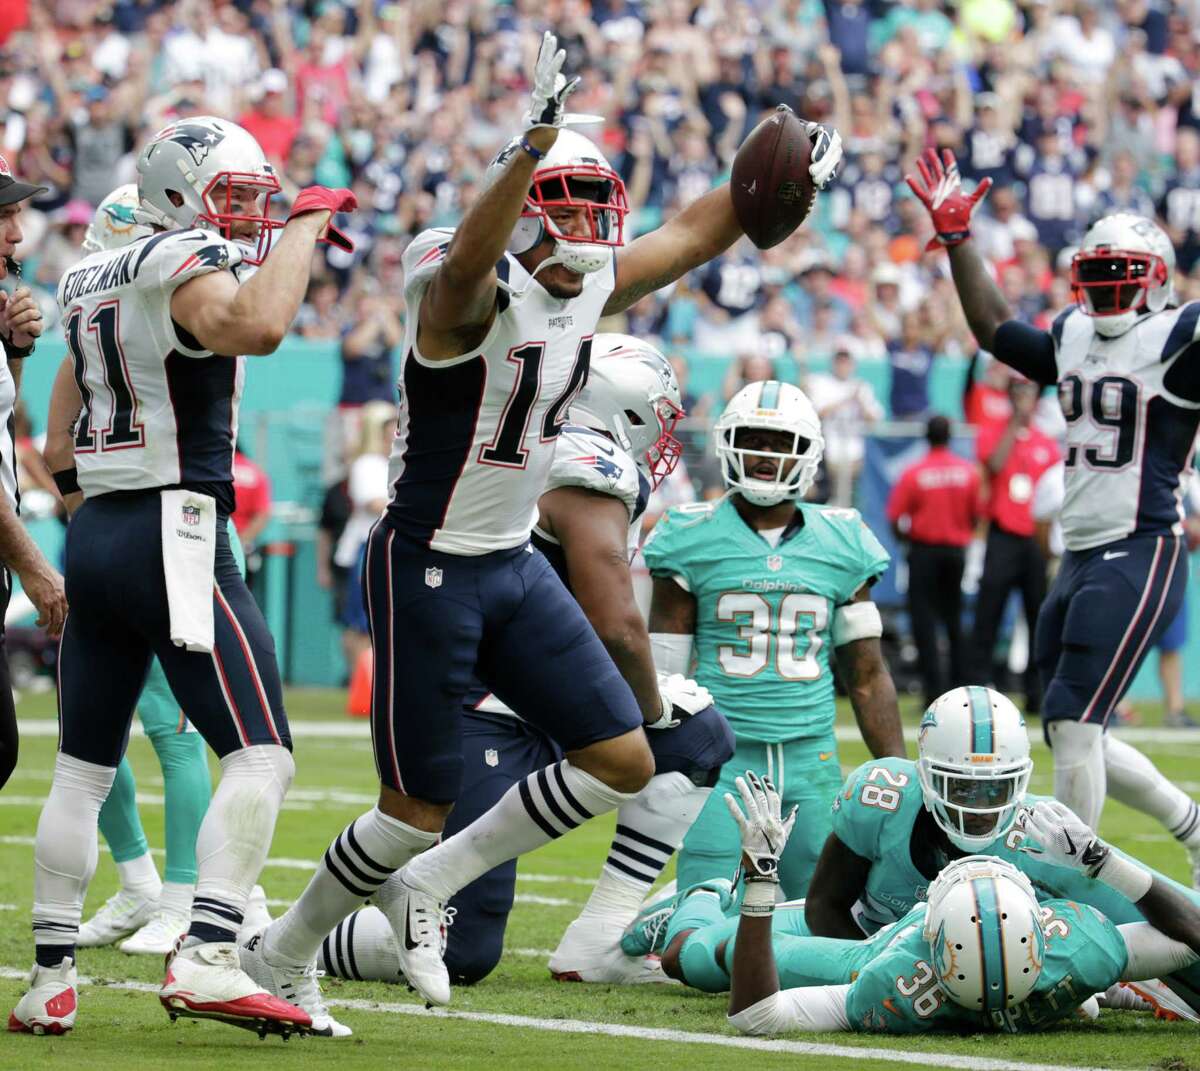 New England Patriots wide receiver Michael Floyd (14) celebrates his touchdown, during the first half of an NFL football game against the Miami Dolphins, Sunday, Jan. 1, 2017, in Miami Gardens, Fla. (AP Photo/Lynne Sladky)